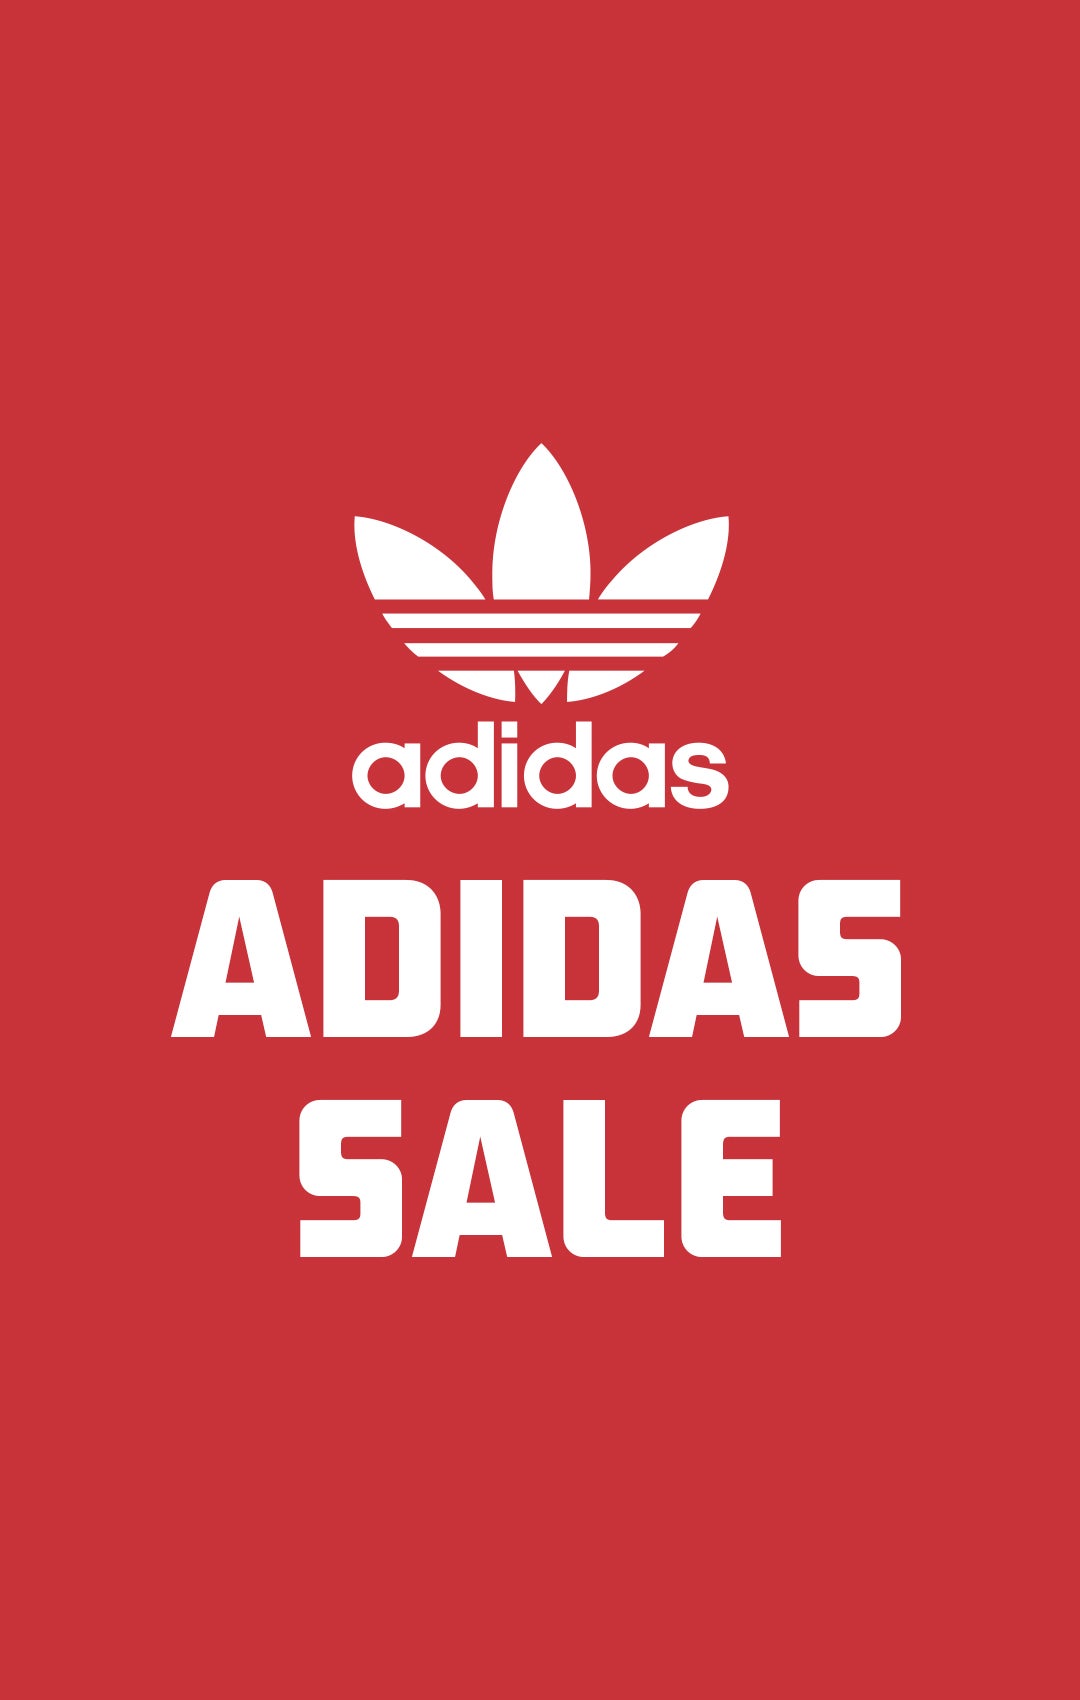 Foot Locker Canada Sale: Save Up to 60% OFF Many Styles Including Hoodies,  Sweatpants, Shoes & More - Canadian Freebies, Coupons, Deals, Bargains,  Flyers, Contests Canada Canadian Freebies, Coupons, Deals, Bargains, Flyers